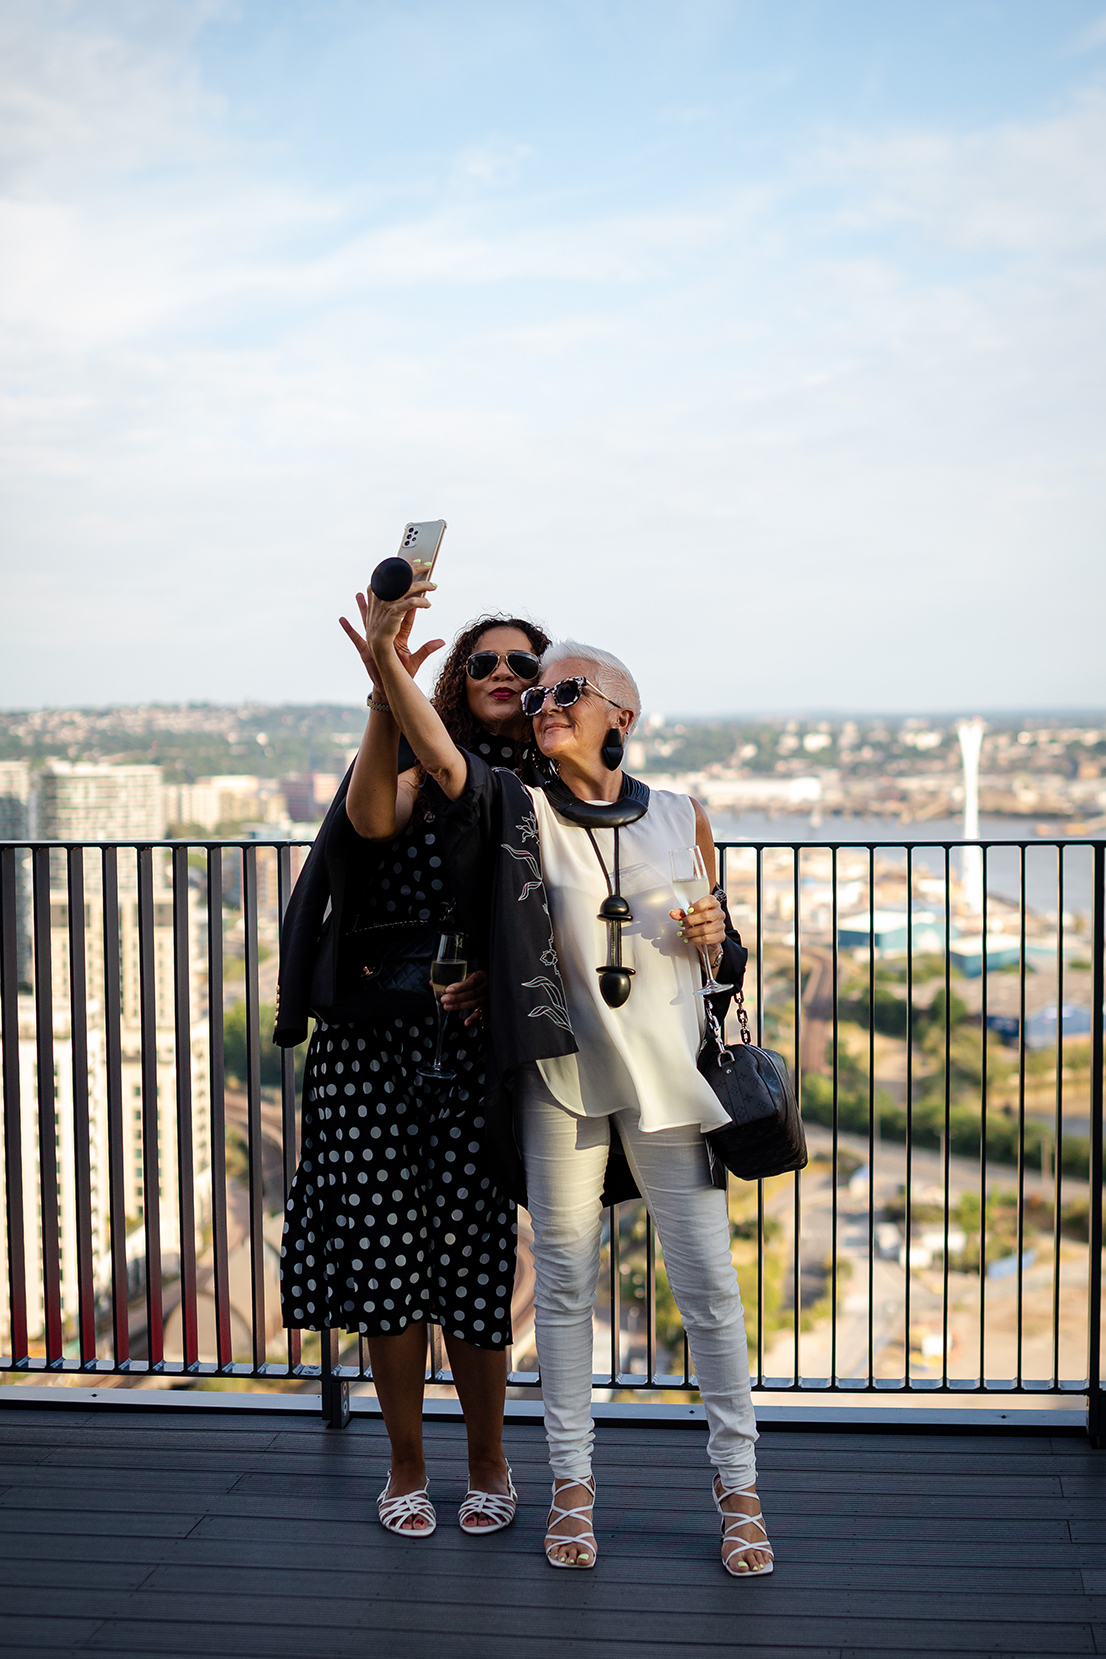 The 25th-floor panorama from London City Island's Penthouse inspires a selfie